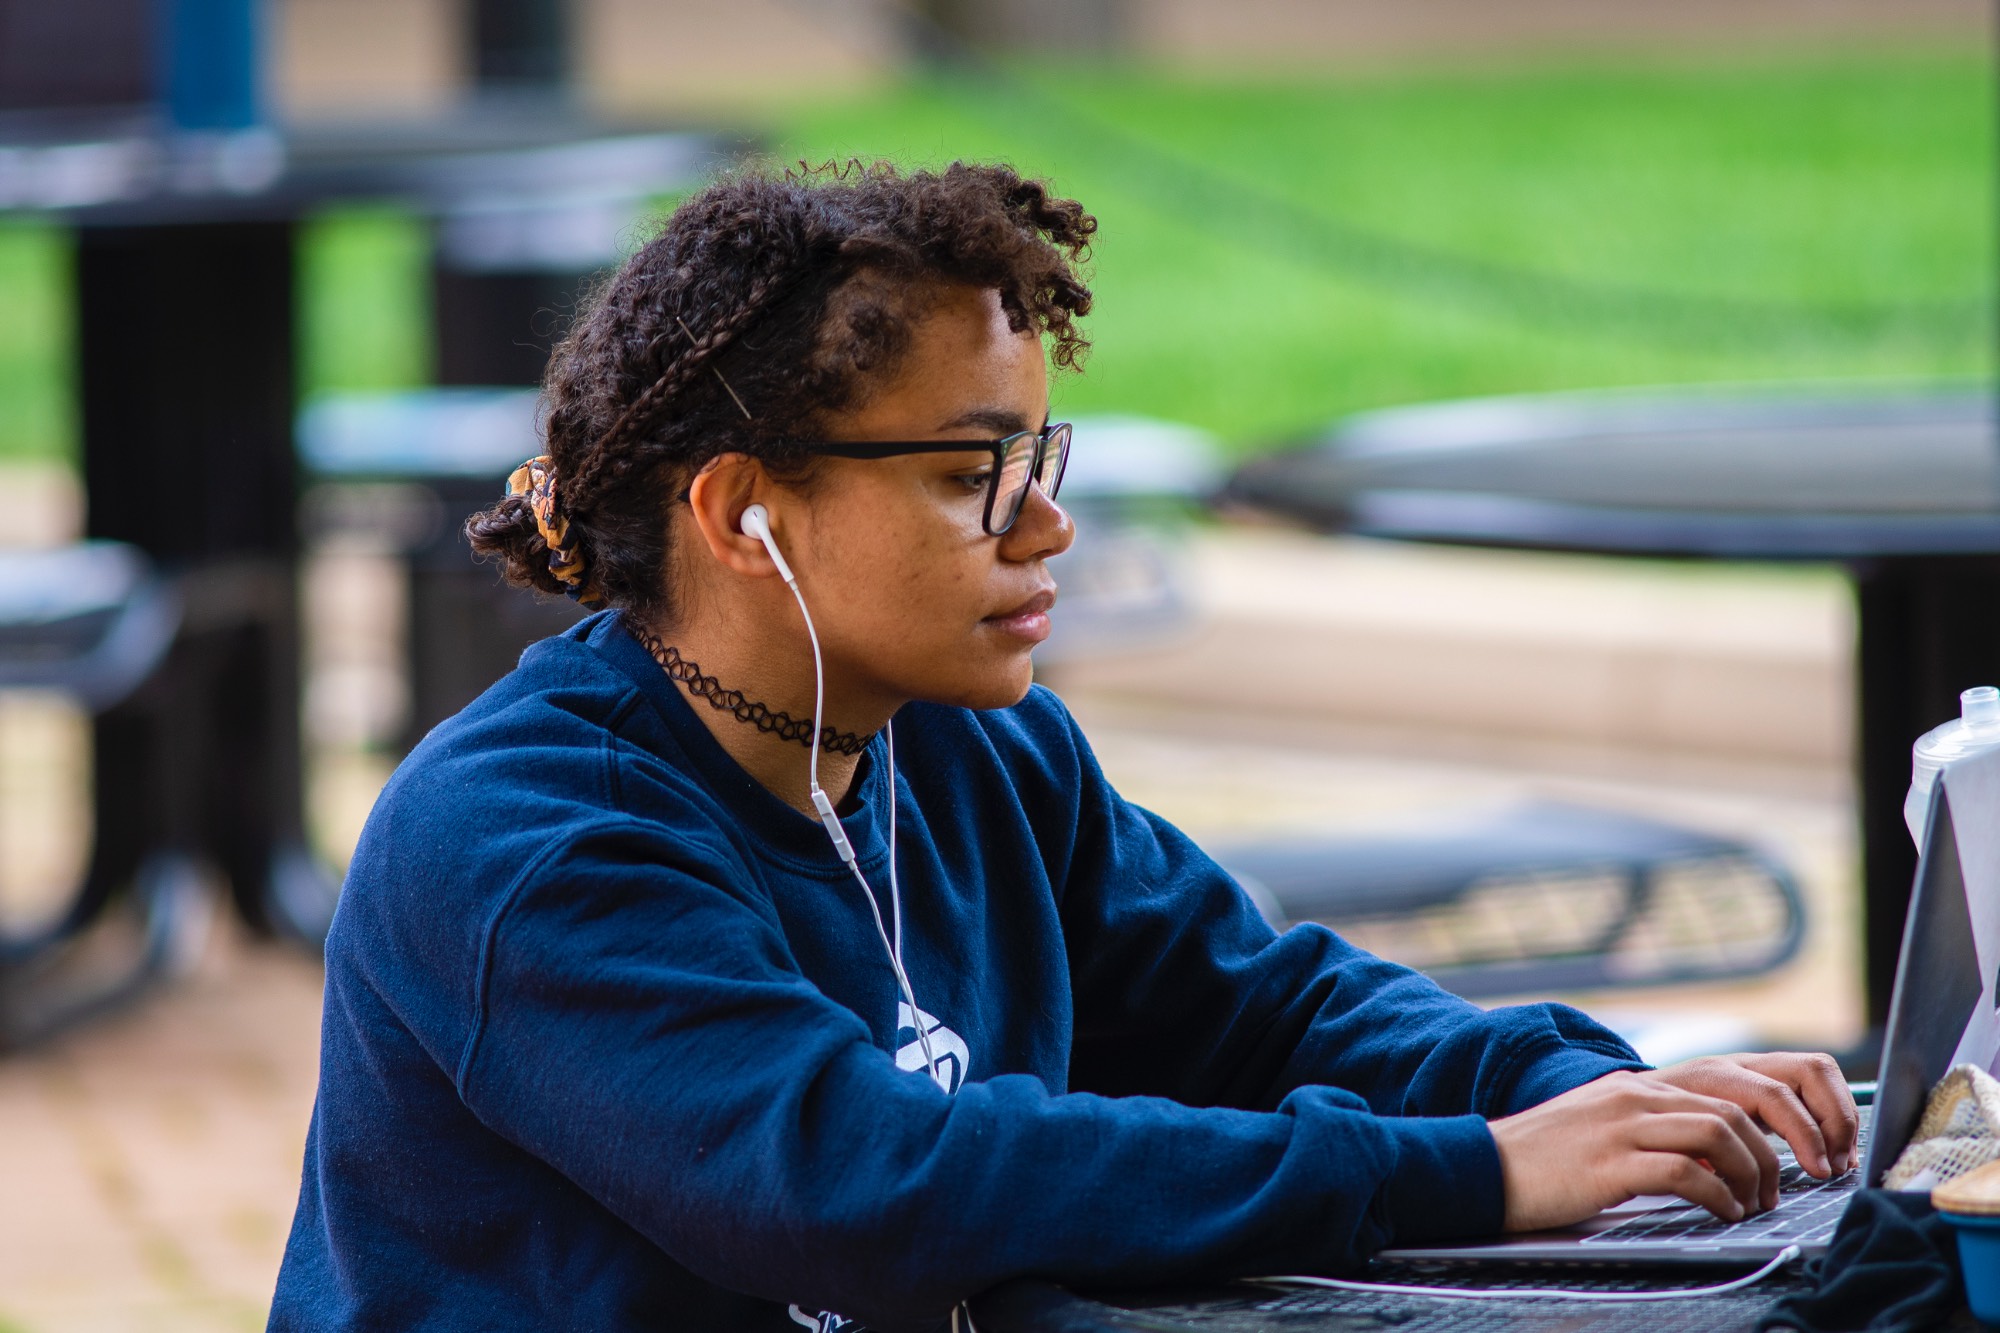 a student listen to music while studying outside